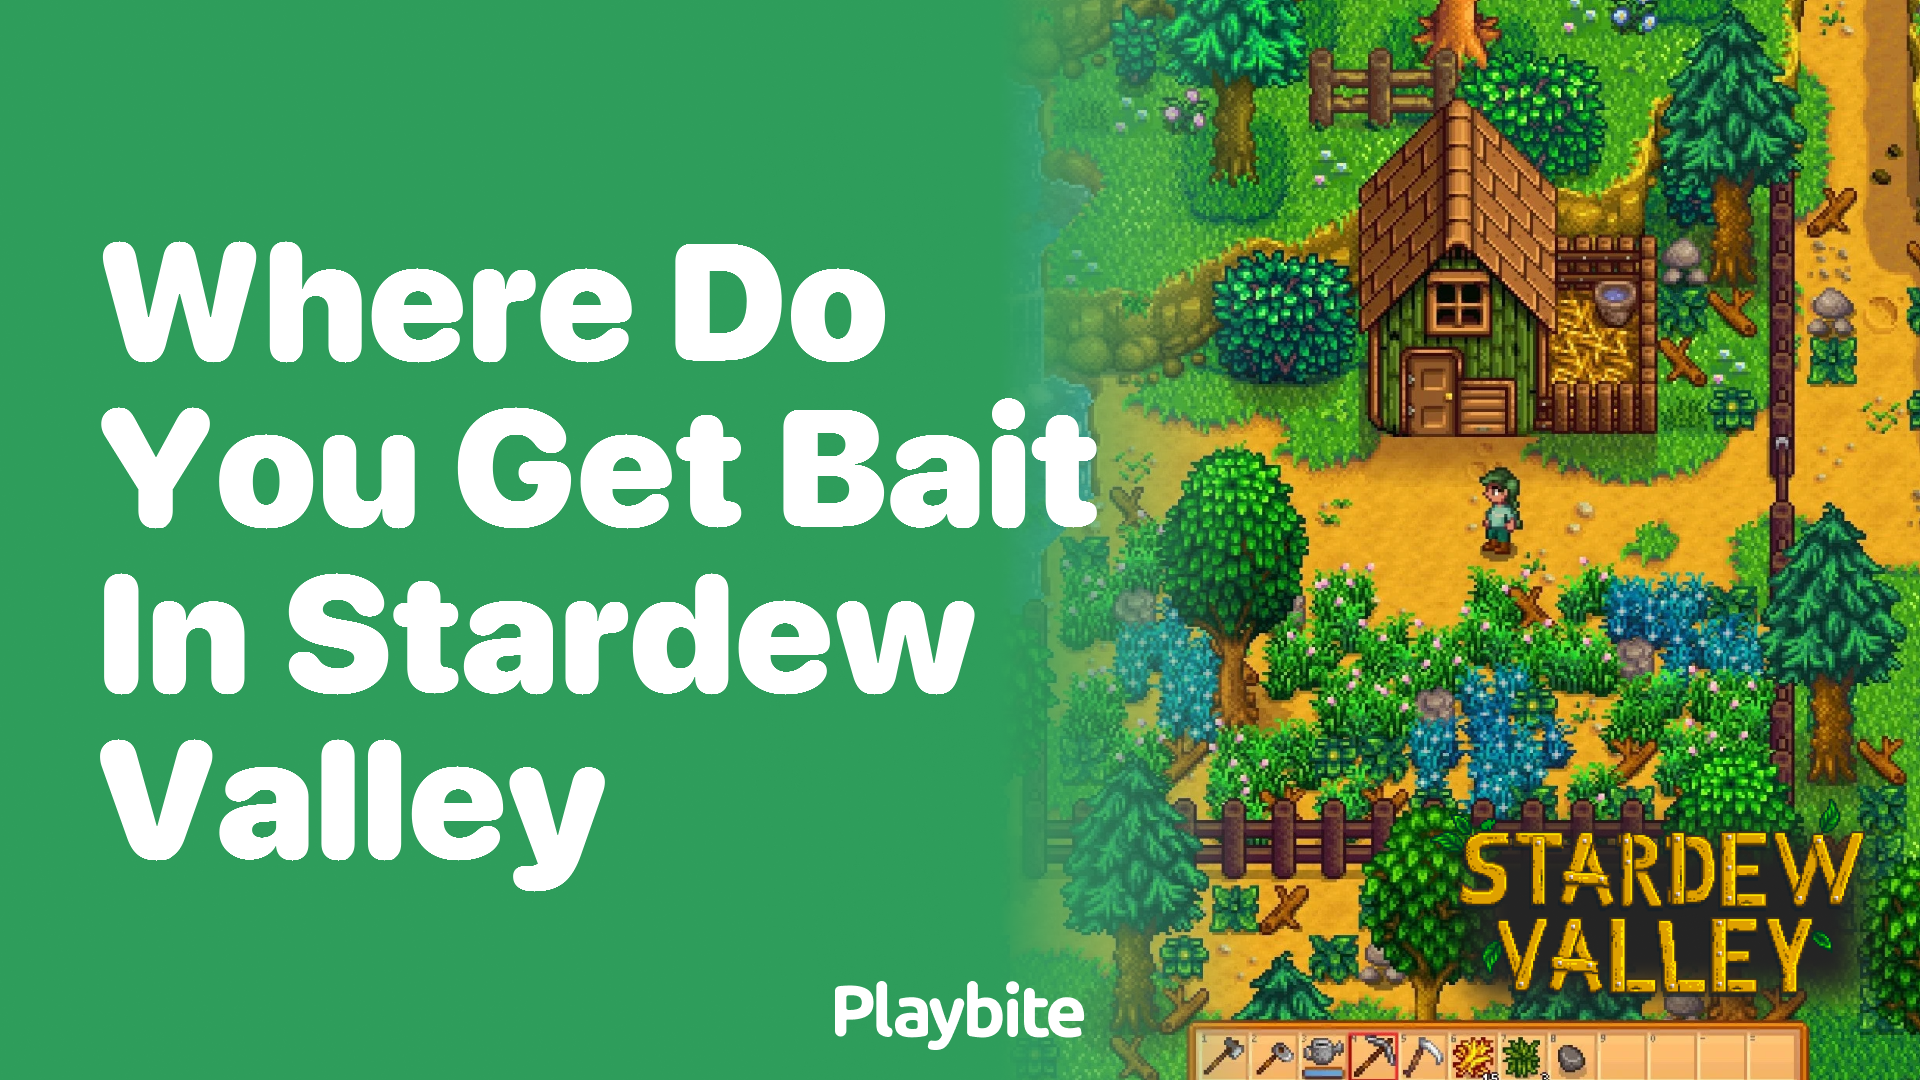 Where do you get bait in Stardew Valley?